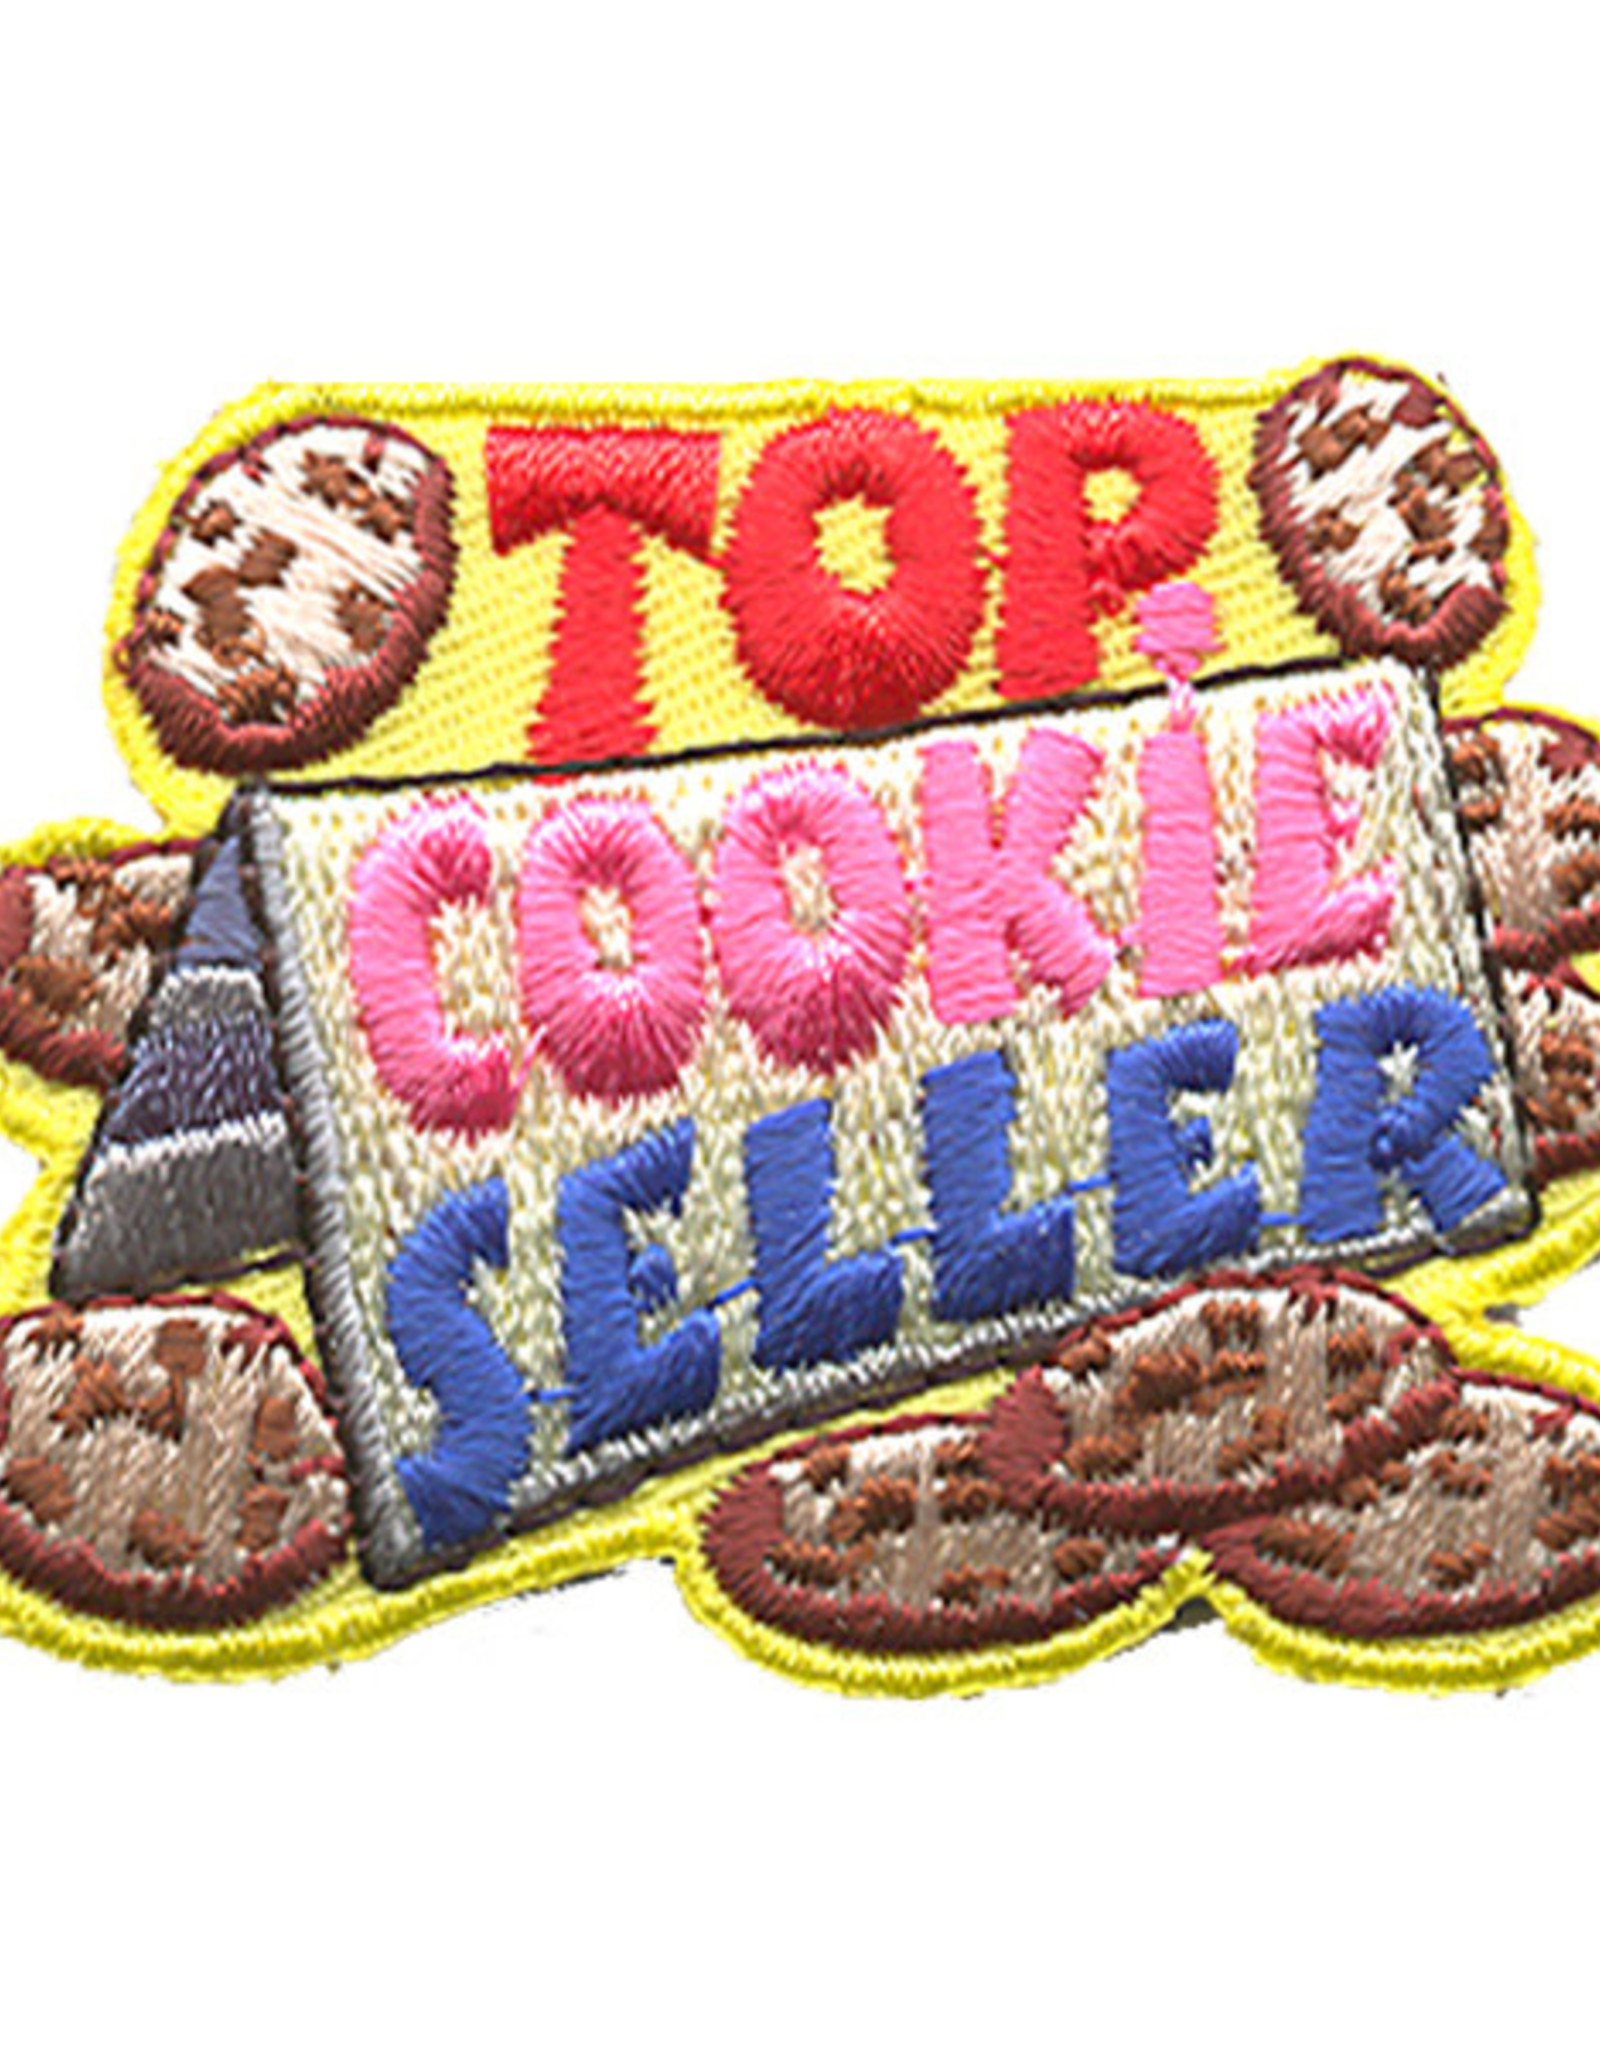 Advantage Emblem & Screen Prnt Top Cookie Seller Fun Patch /w sign and cookies